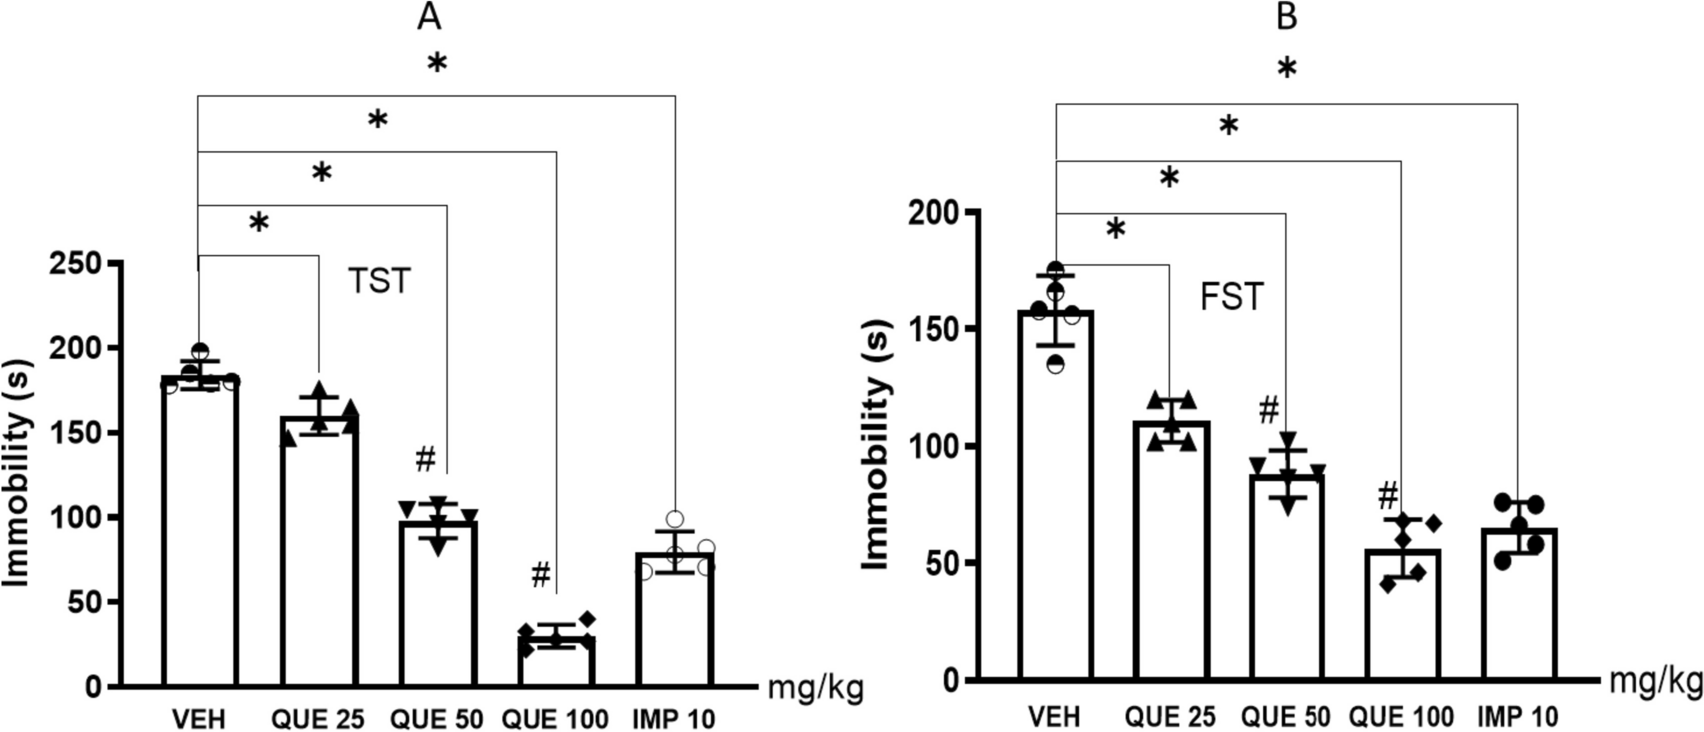 The monoaminergic pathways are involved in the antidepressant-like effect of quercetin